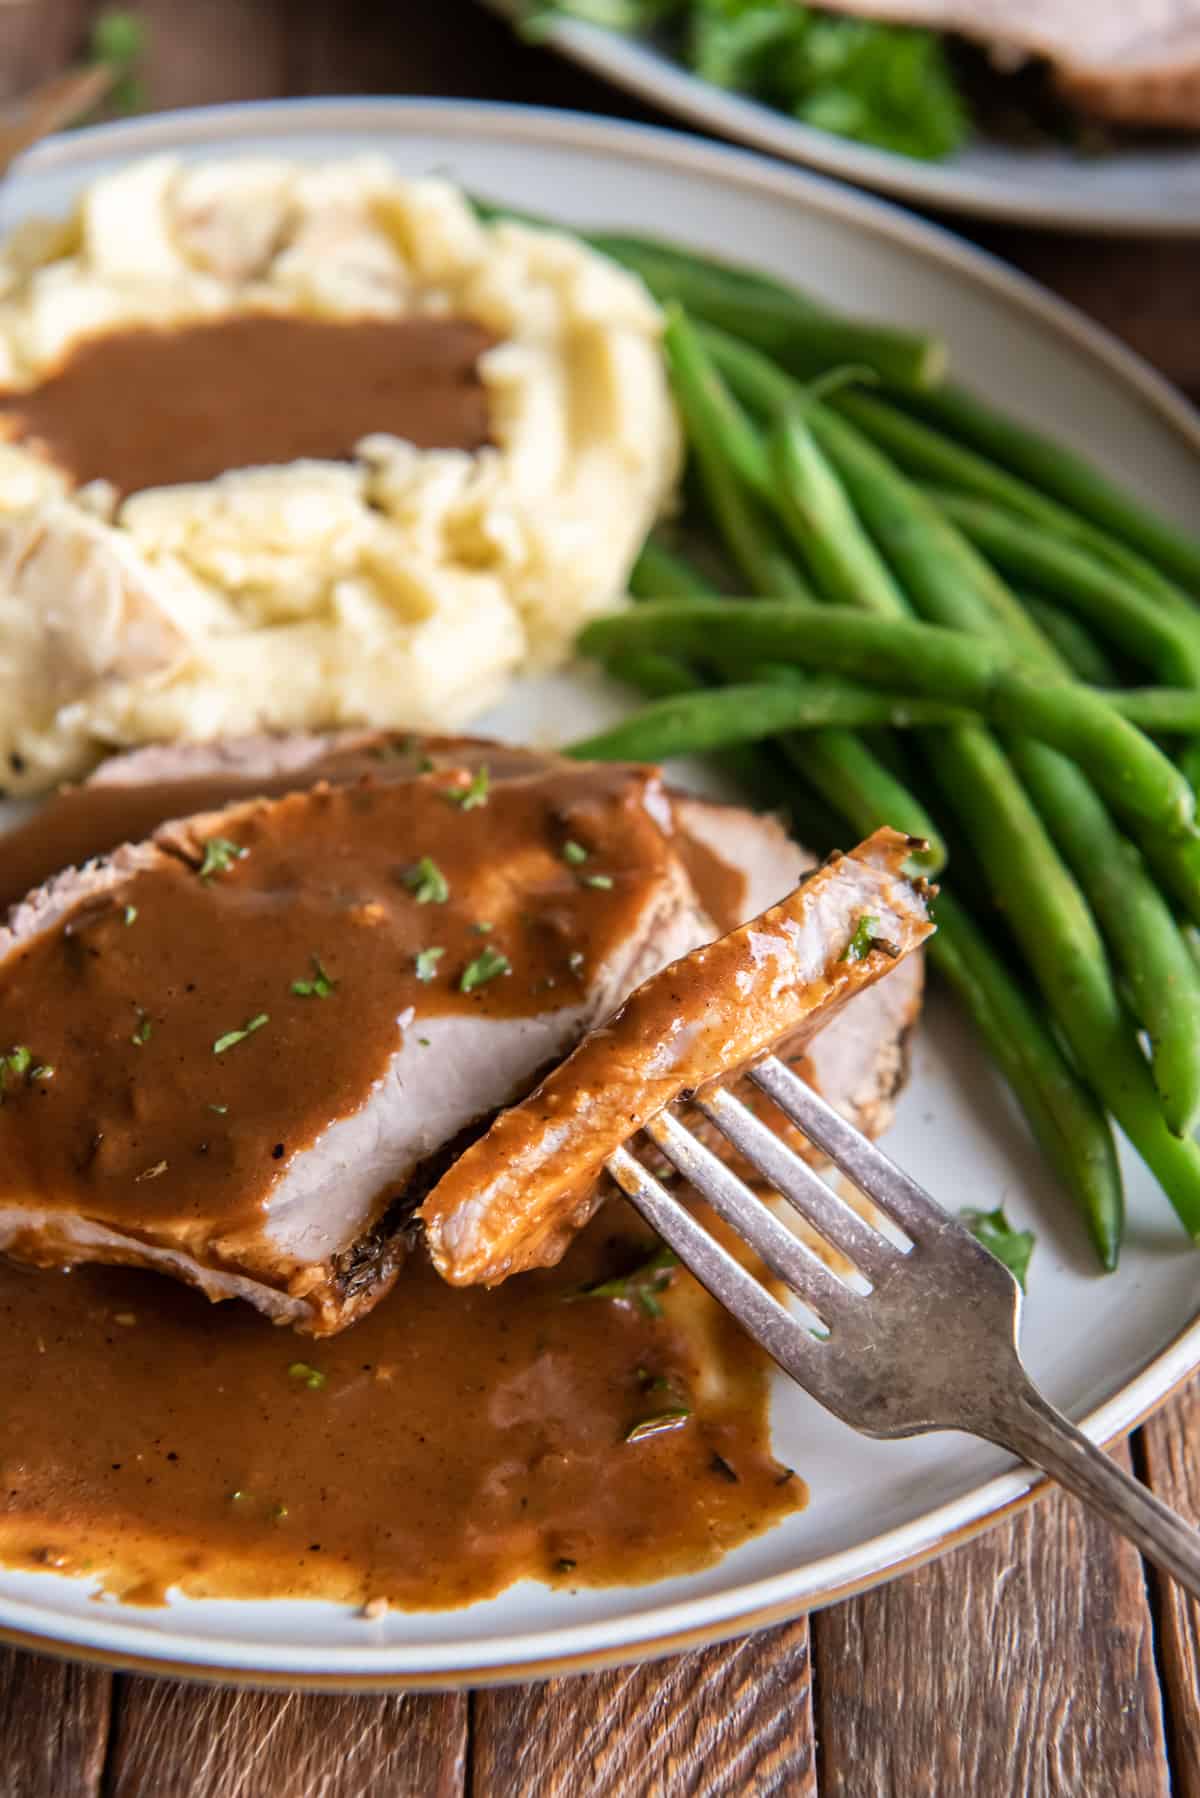 A fork with a bite of pork loin with gravy on a white plate.